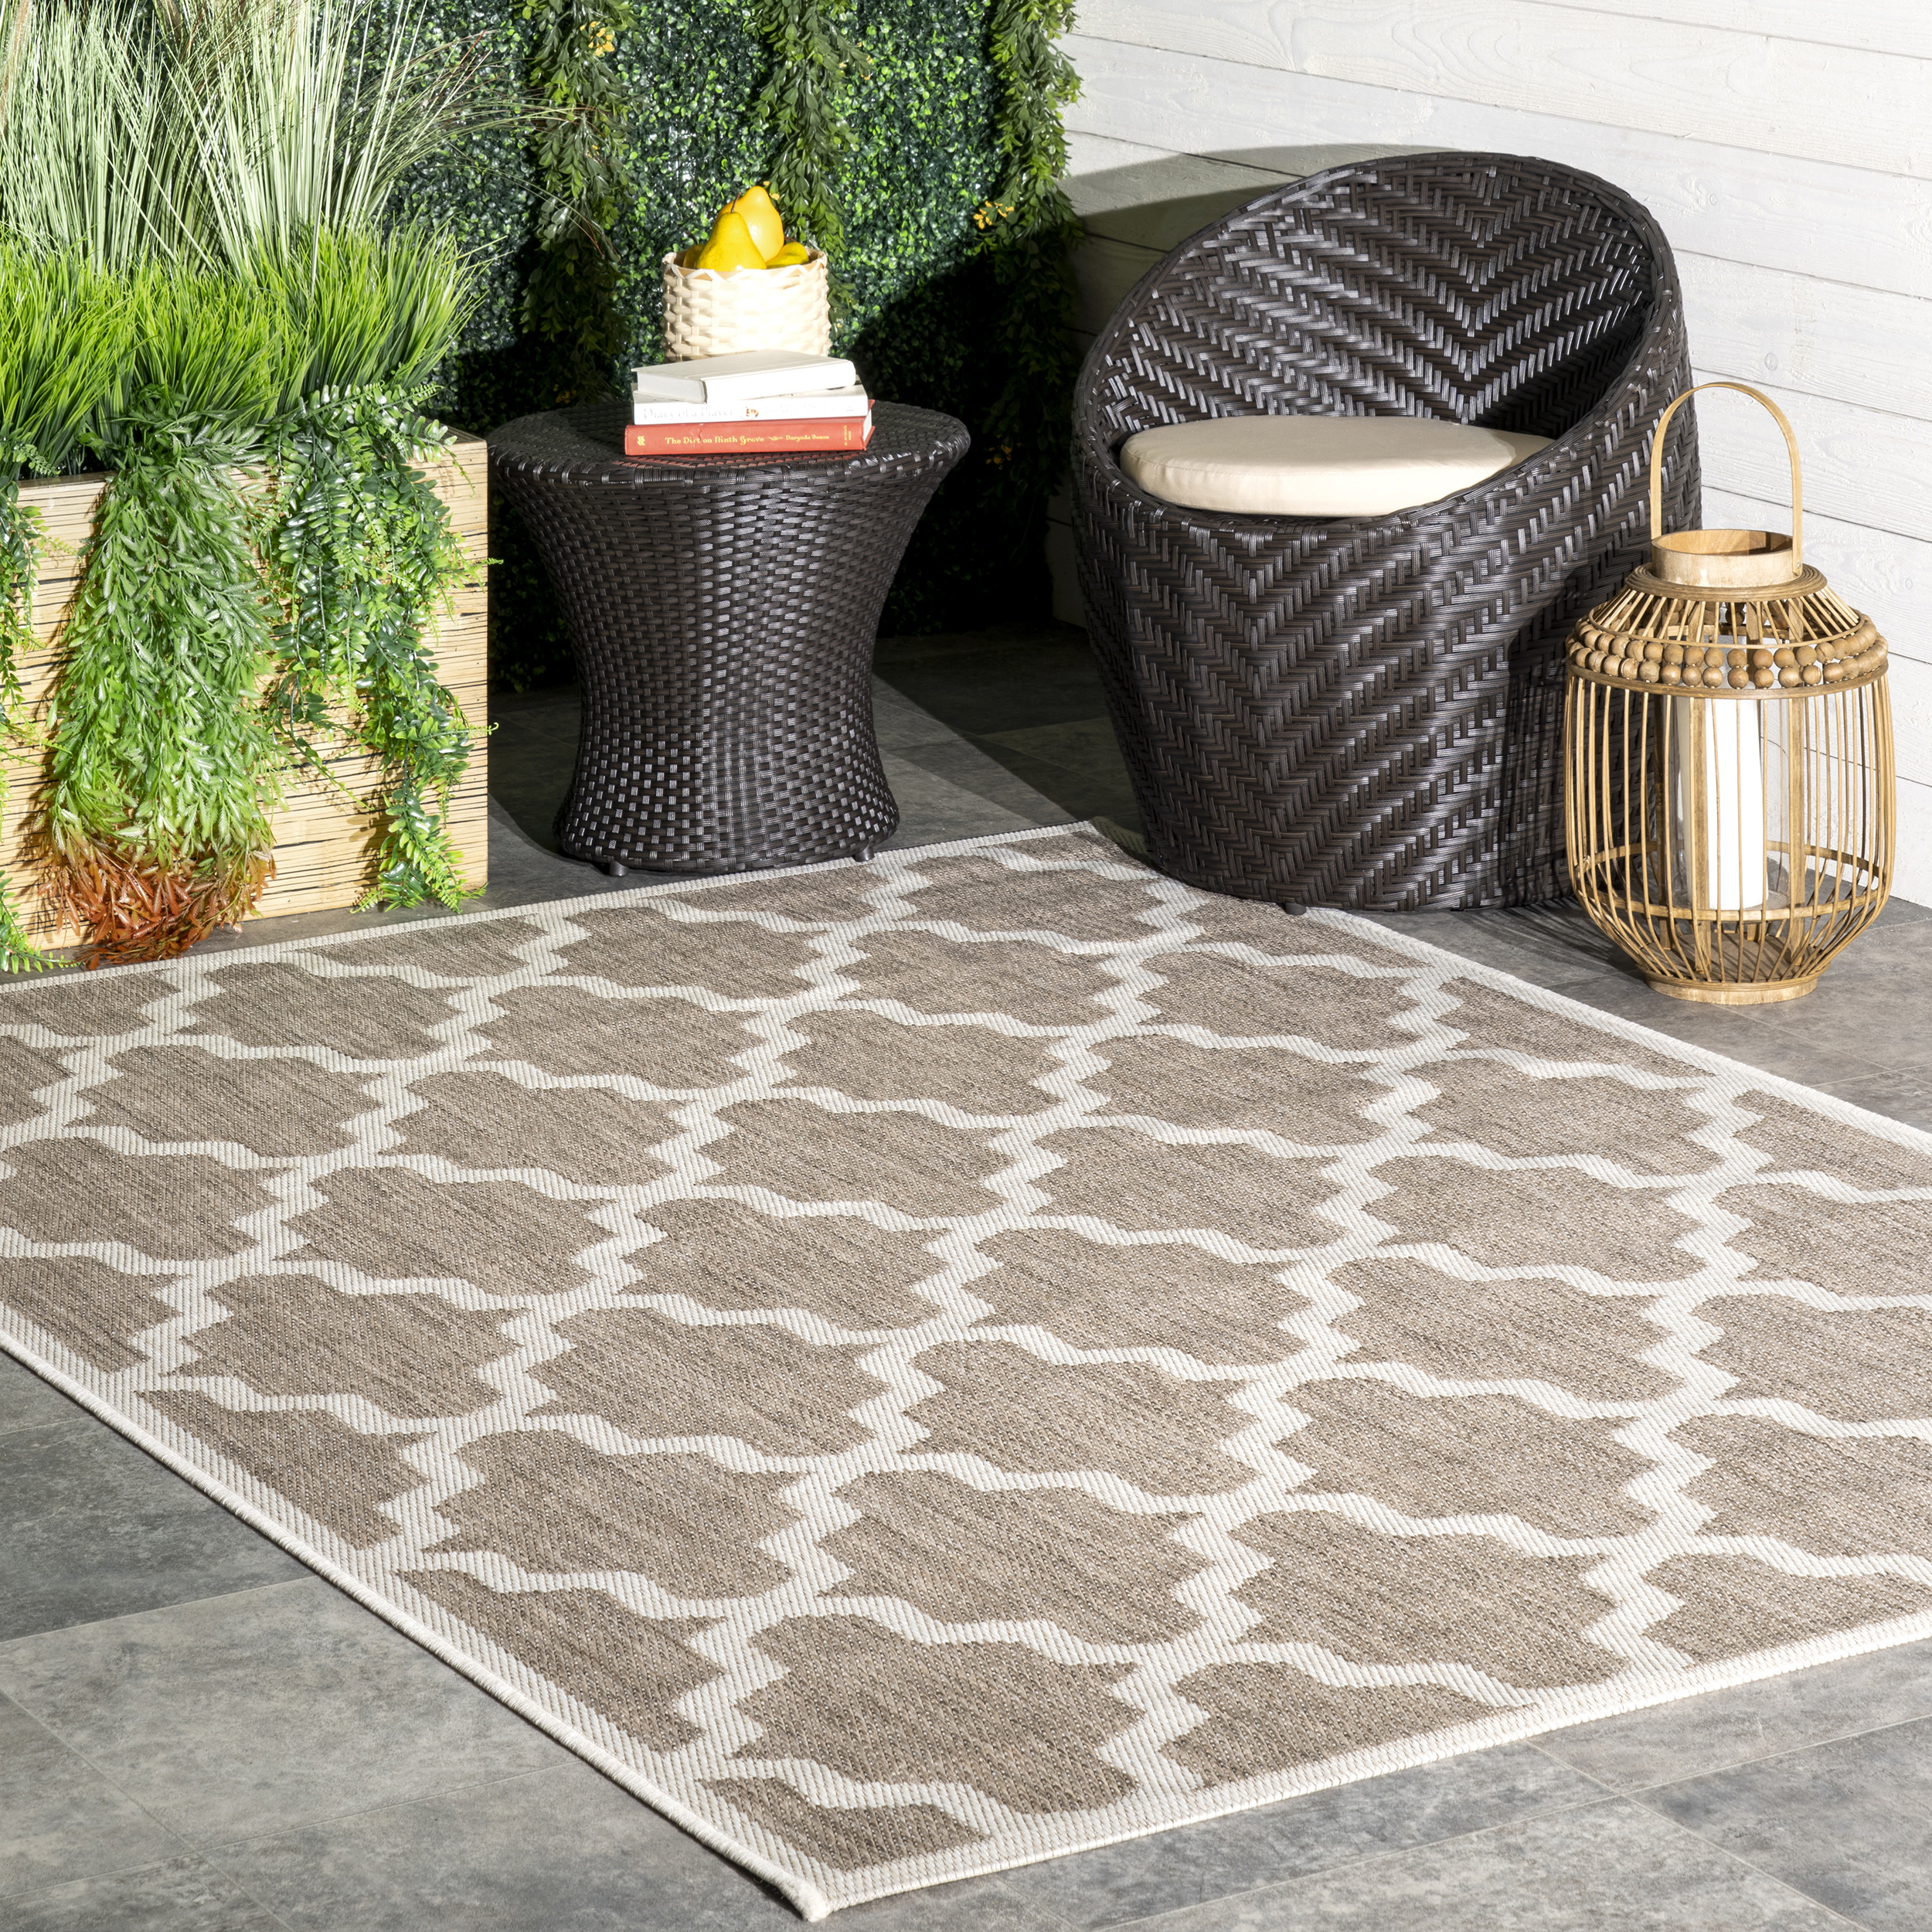 nuLOOM Gina Moroccan Indoor/Outdoor Area Rug, 8', Taupe - image 1 of 9